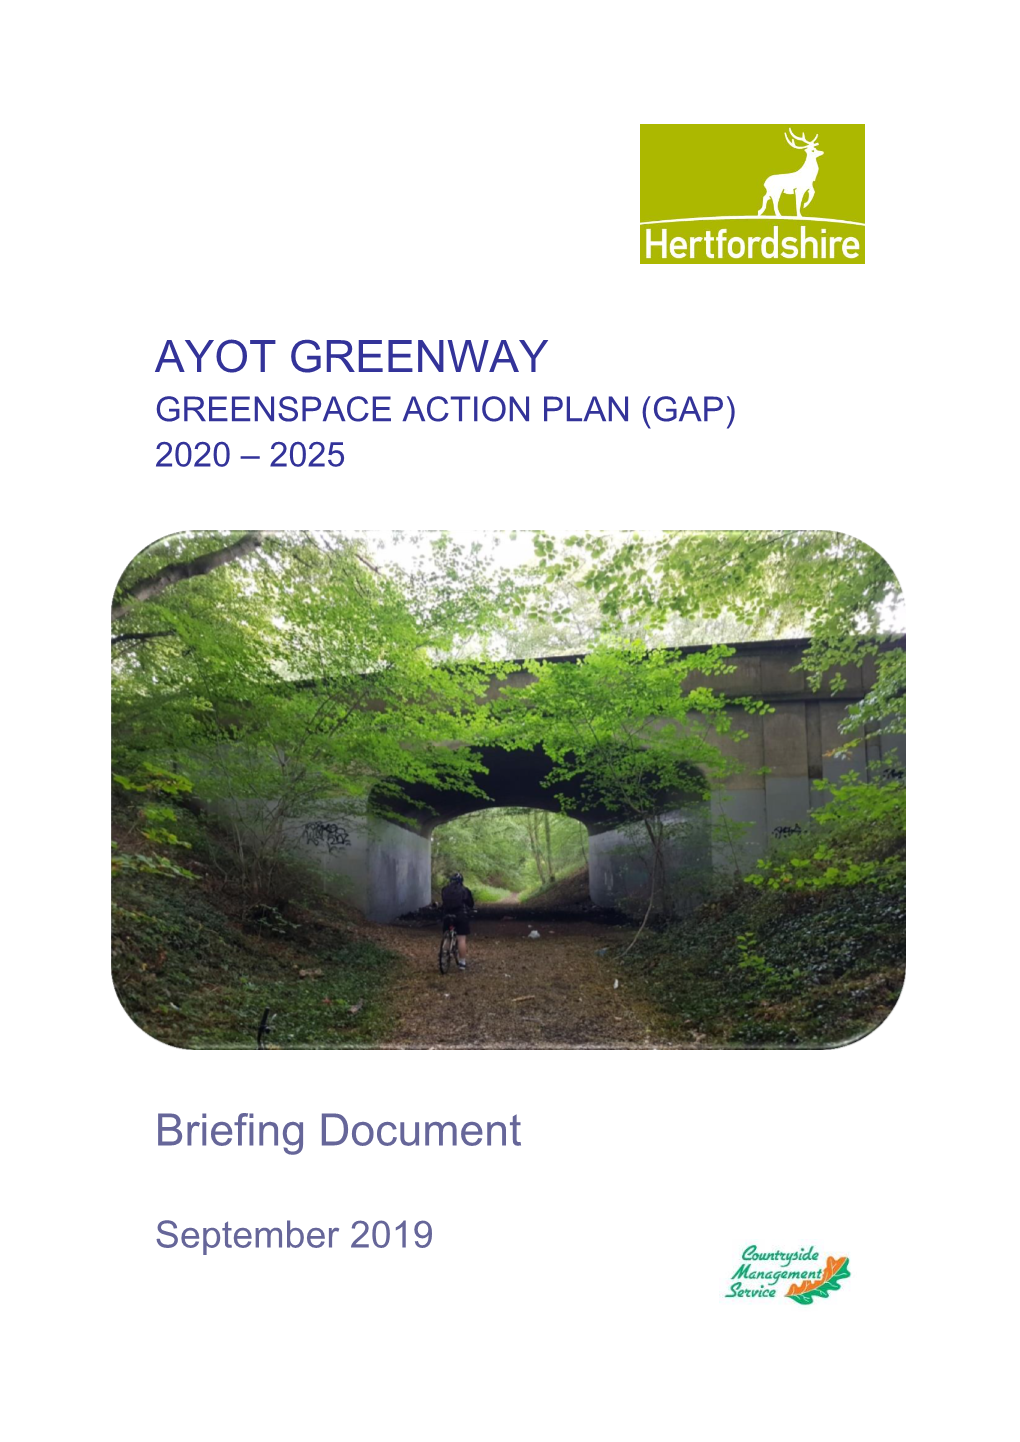 AYOT GREENWAY Briefing Document